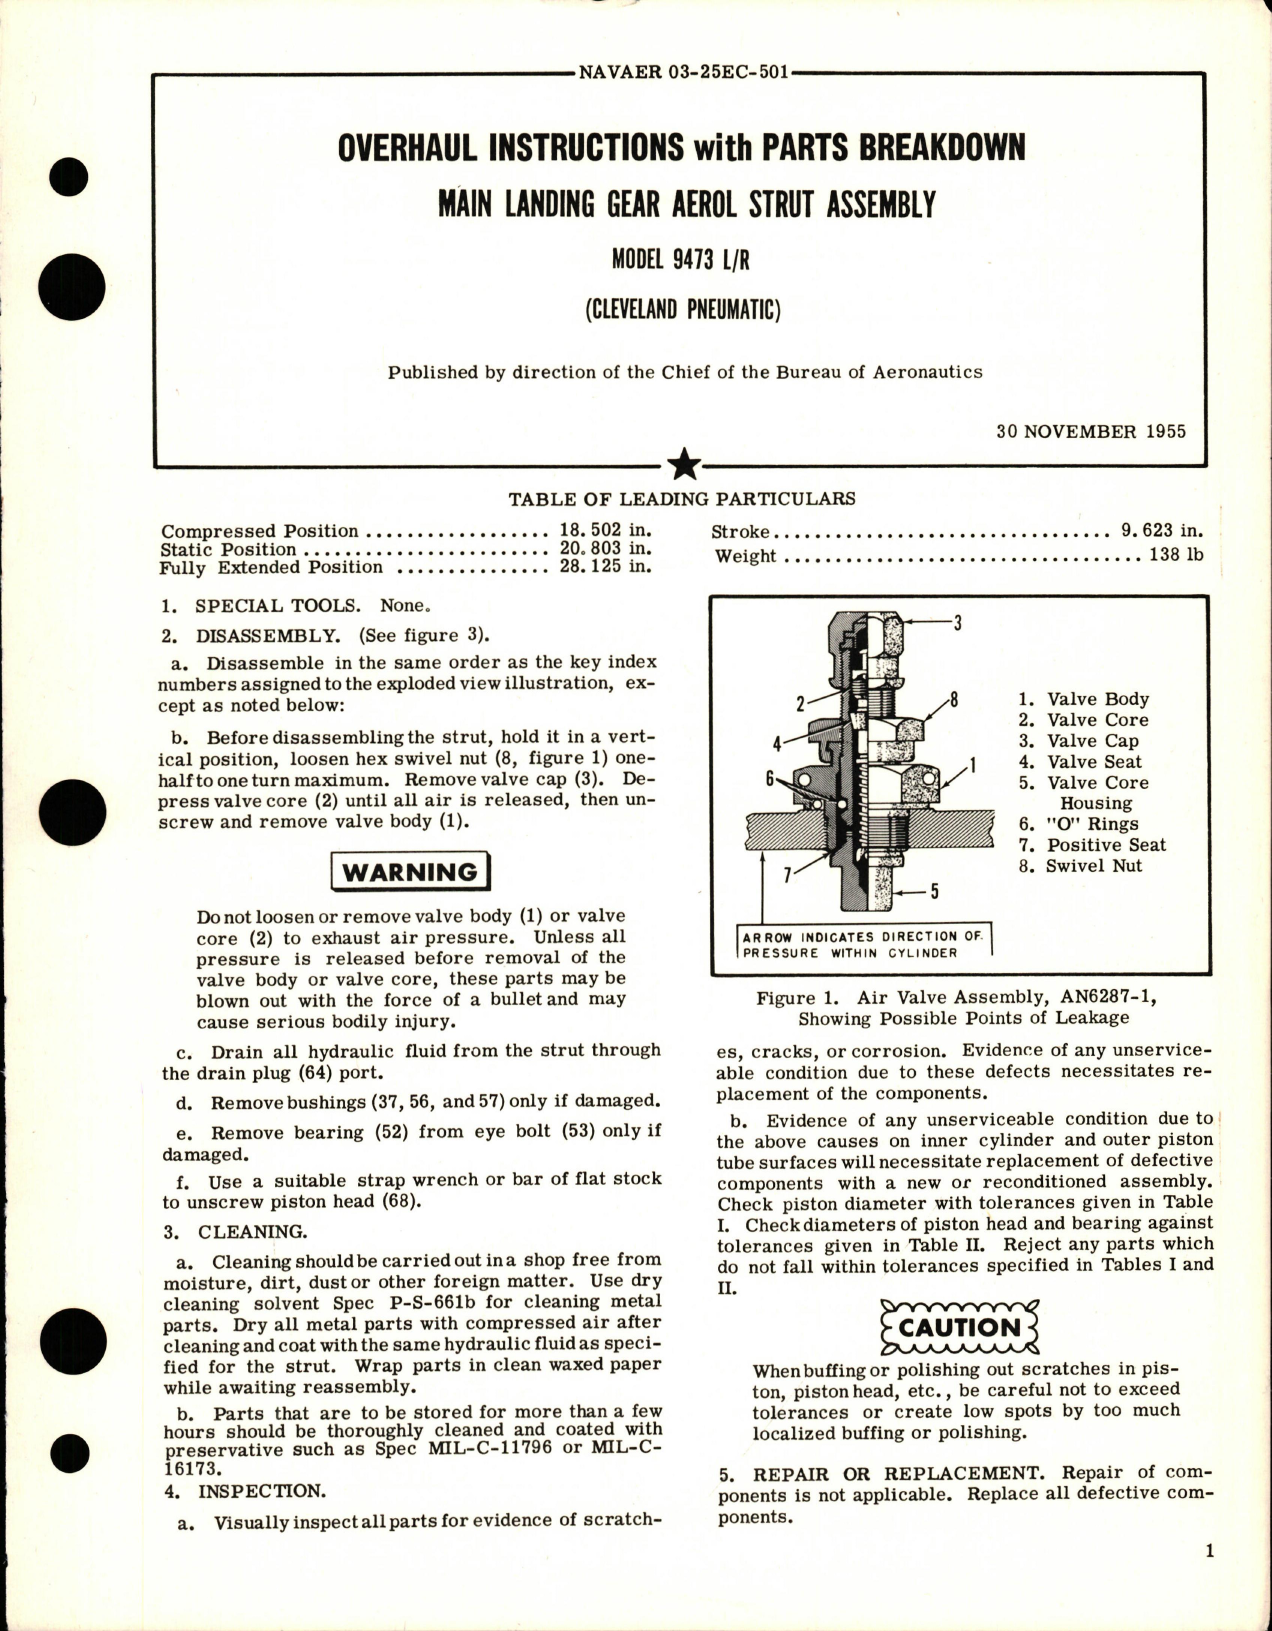 Sample page 1 from AirCorps Library document: Overhaul Instructions with Parts Breakdown for Main Landing Gear Aerol Strut Assembly - Model 9473